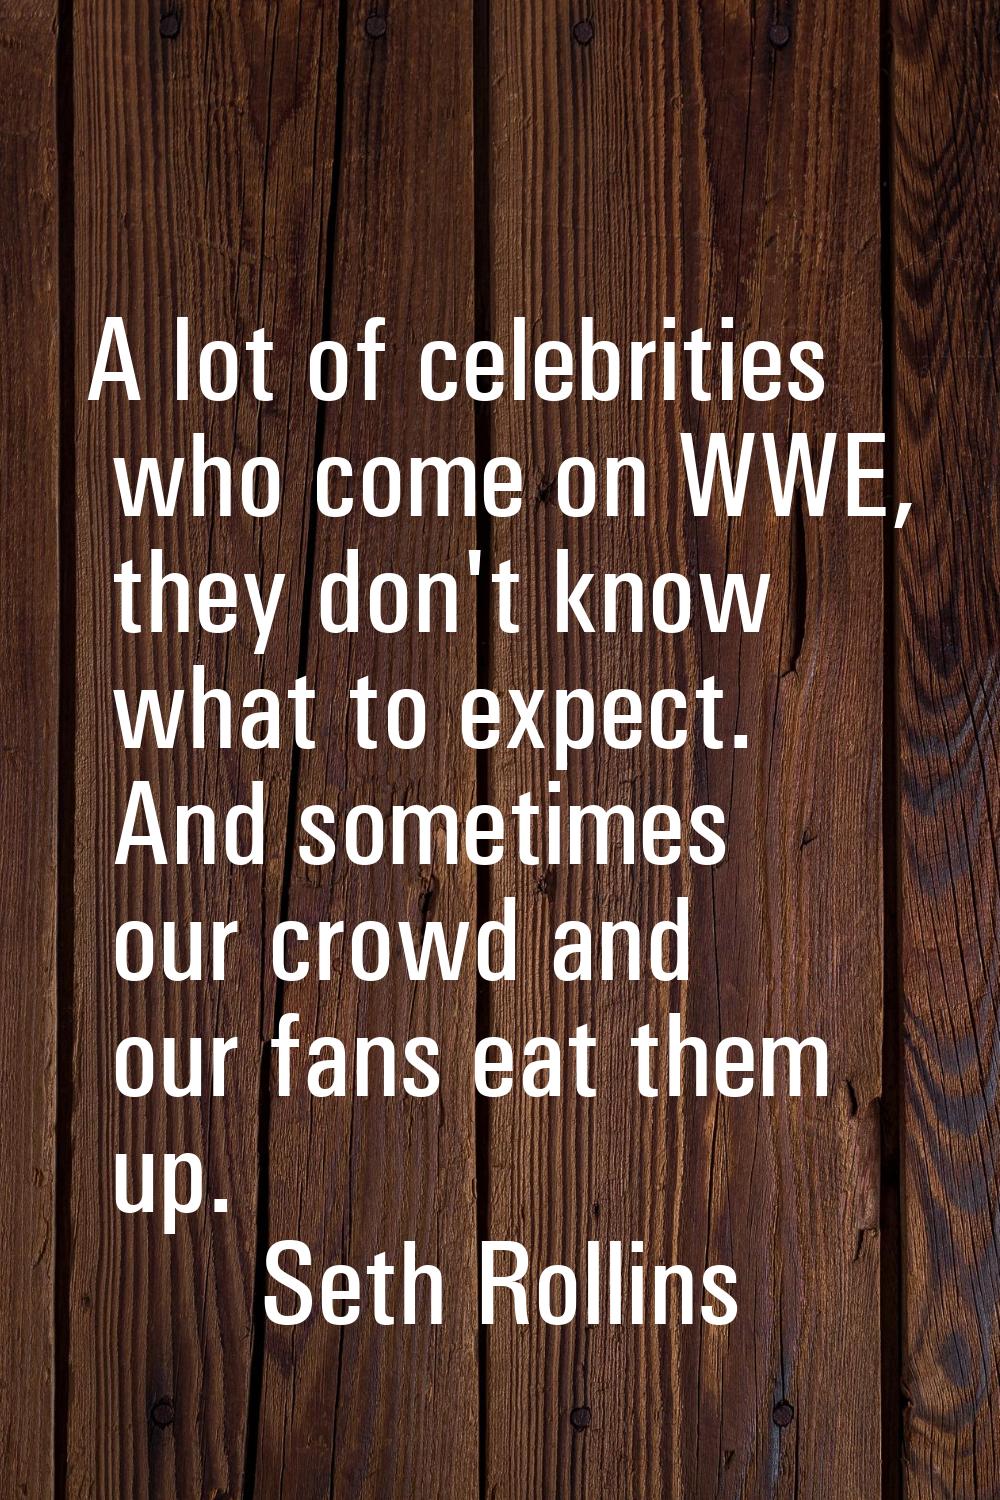 A lot of celebrities who come on WWE, they don't know what to expect. And sometimes our crowd and o